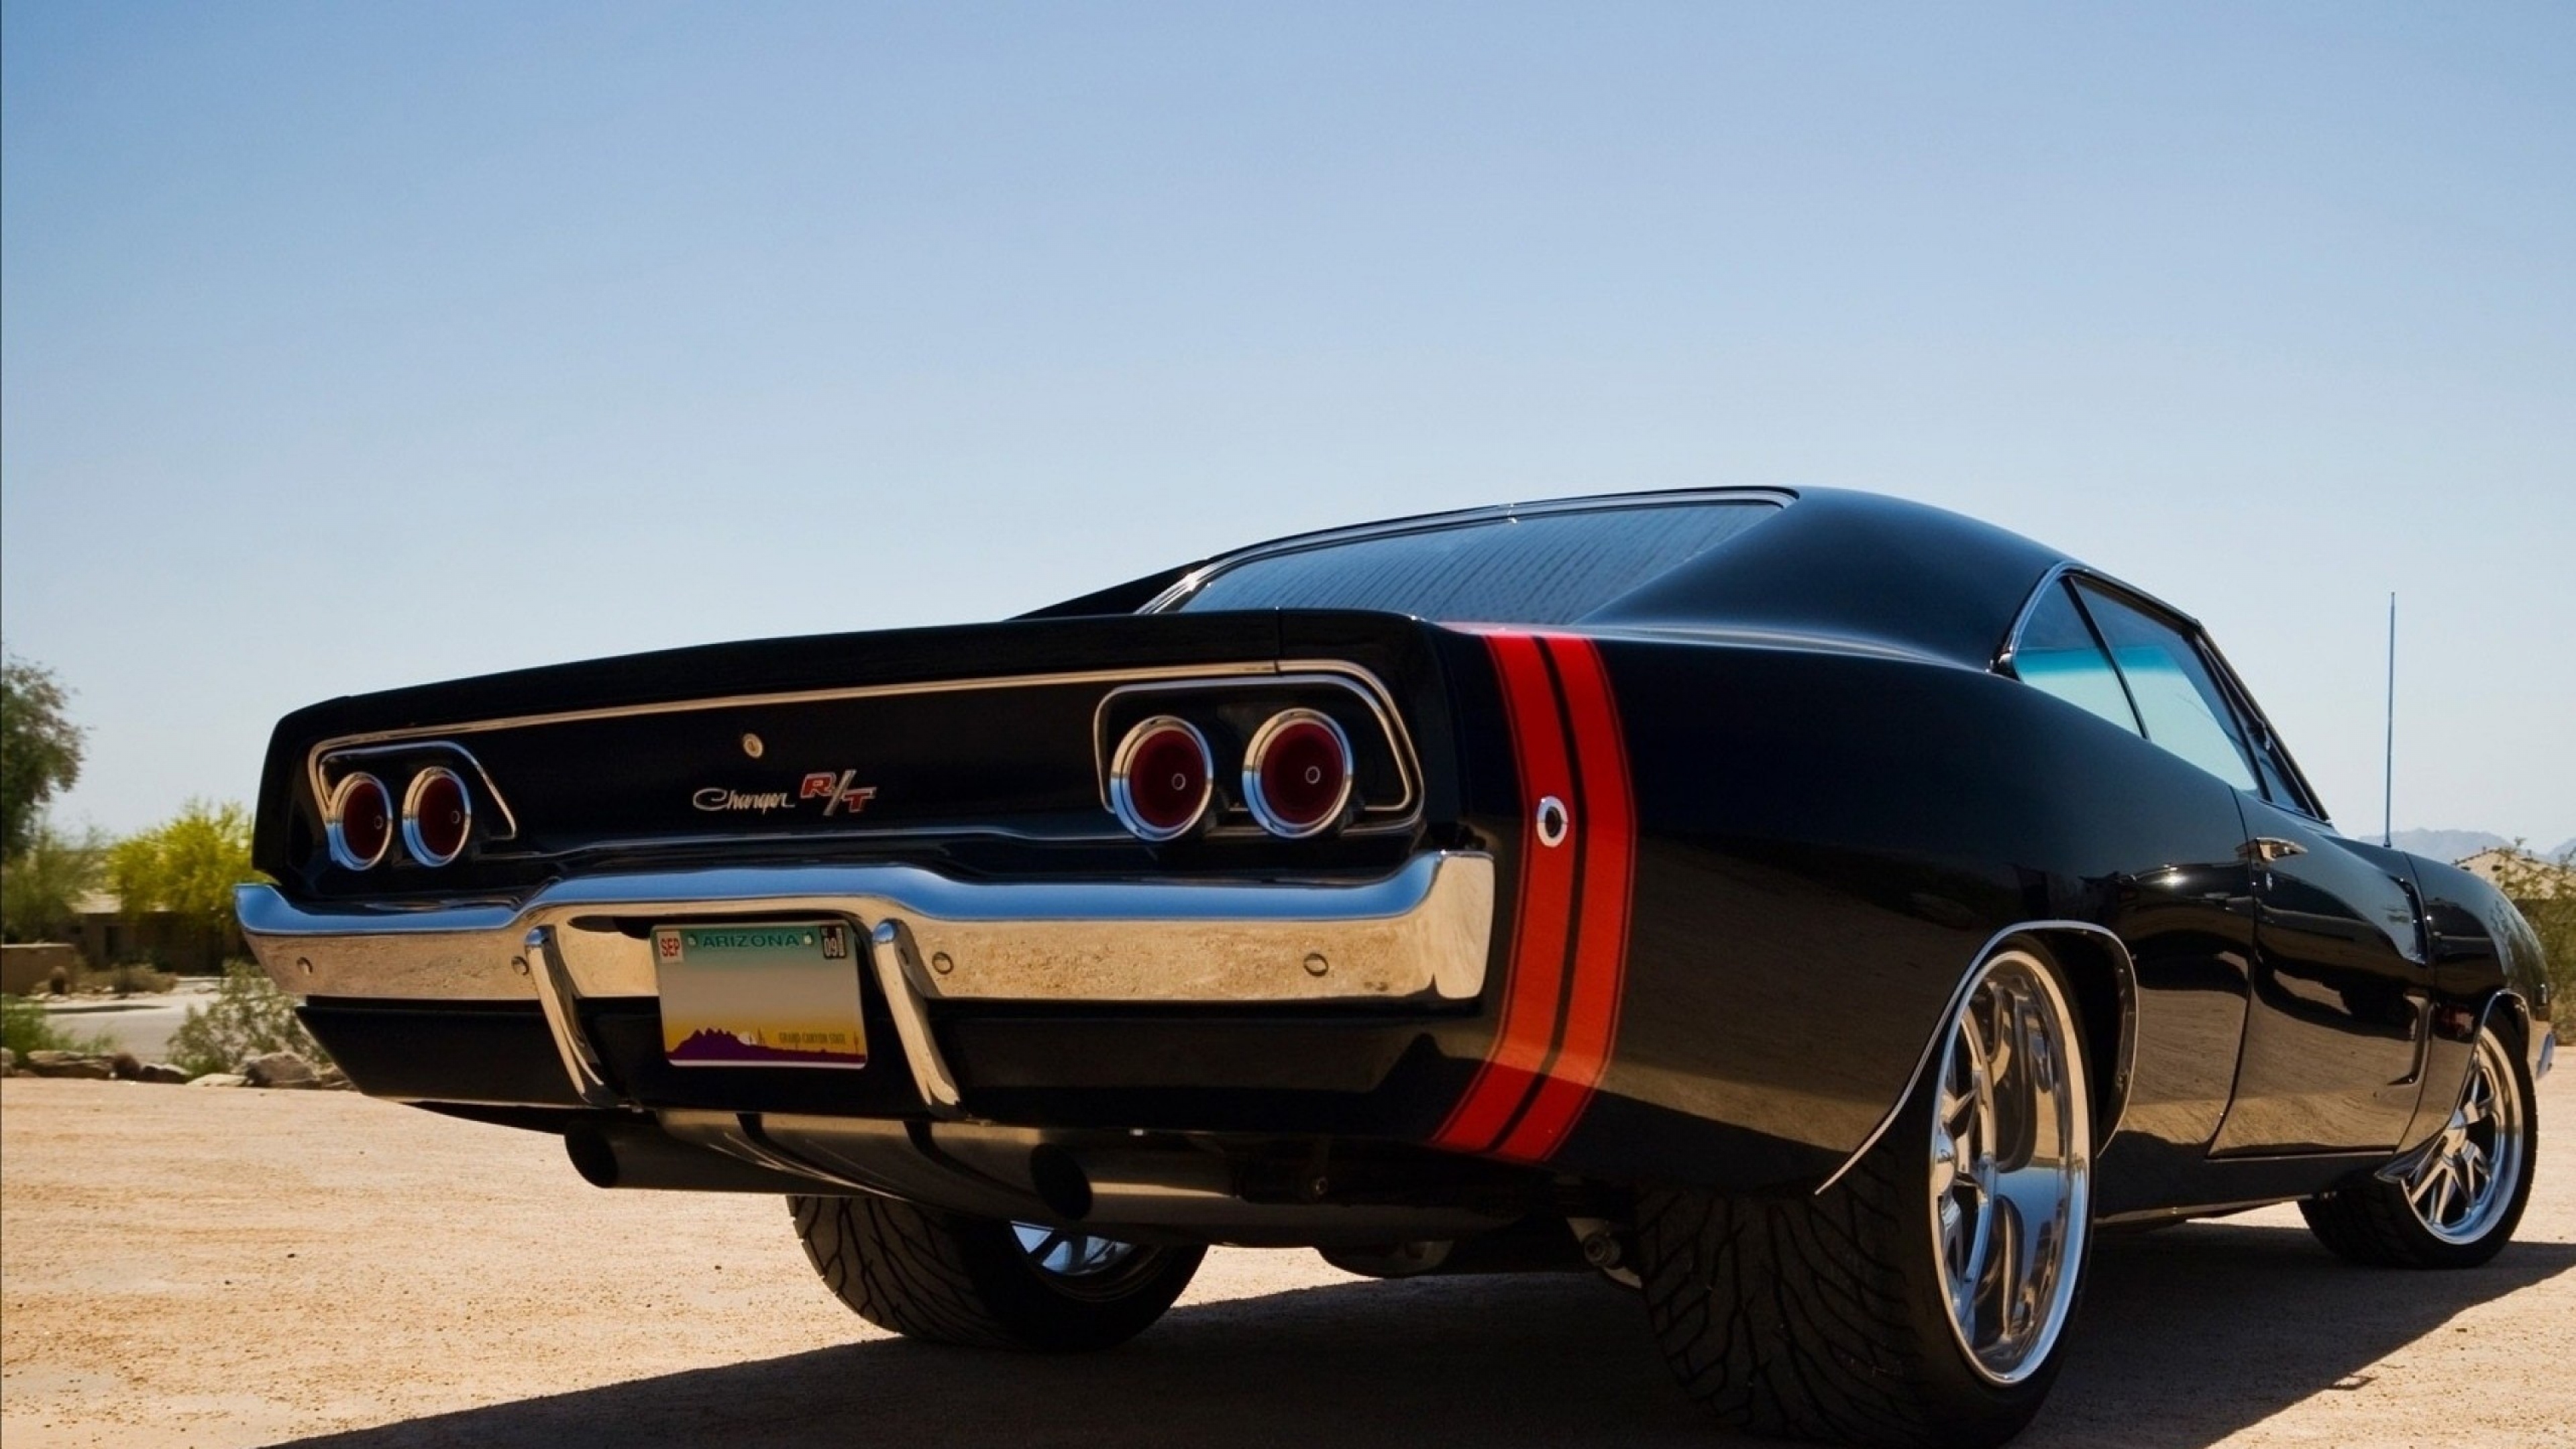 Wallpaper 3840x2160 Muscle cars Dodge Dodge charger Car Stylish 4K 3840x2160